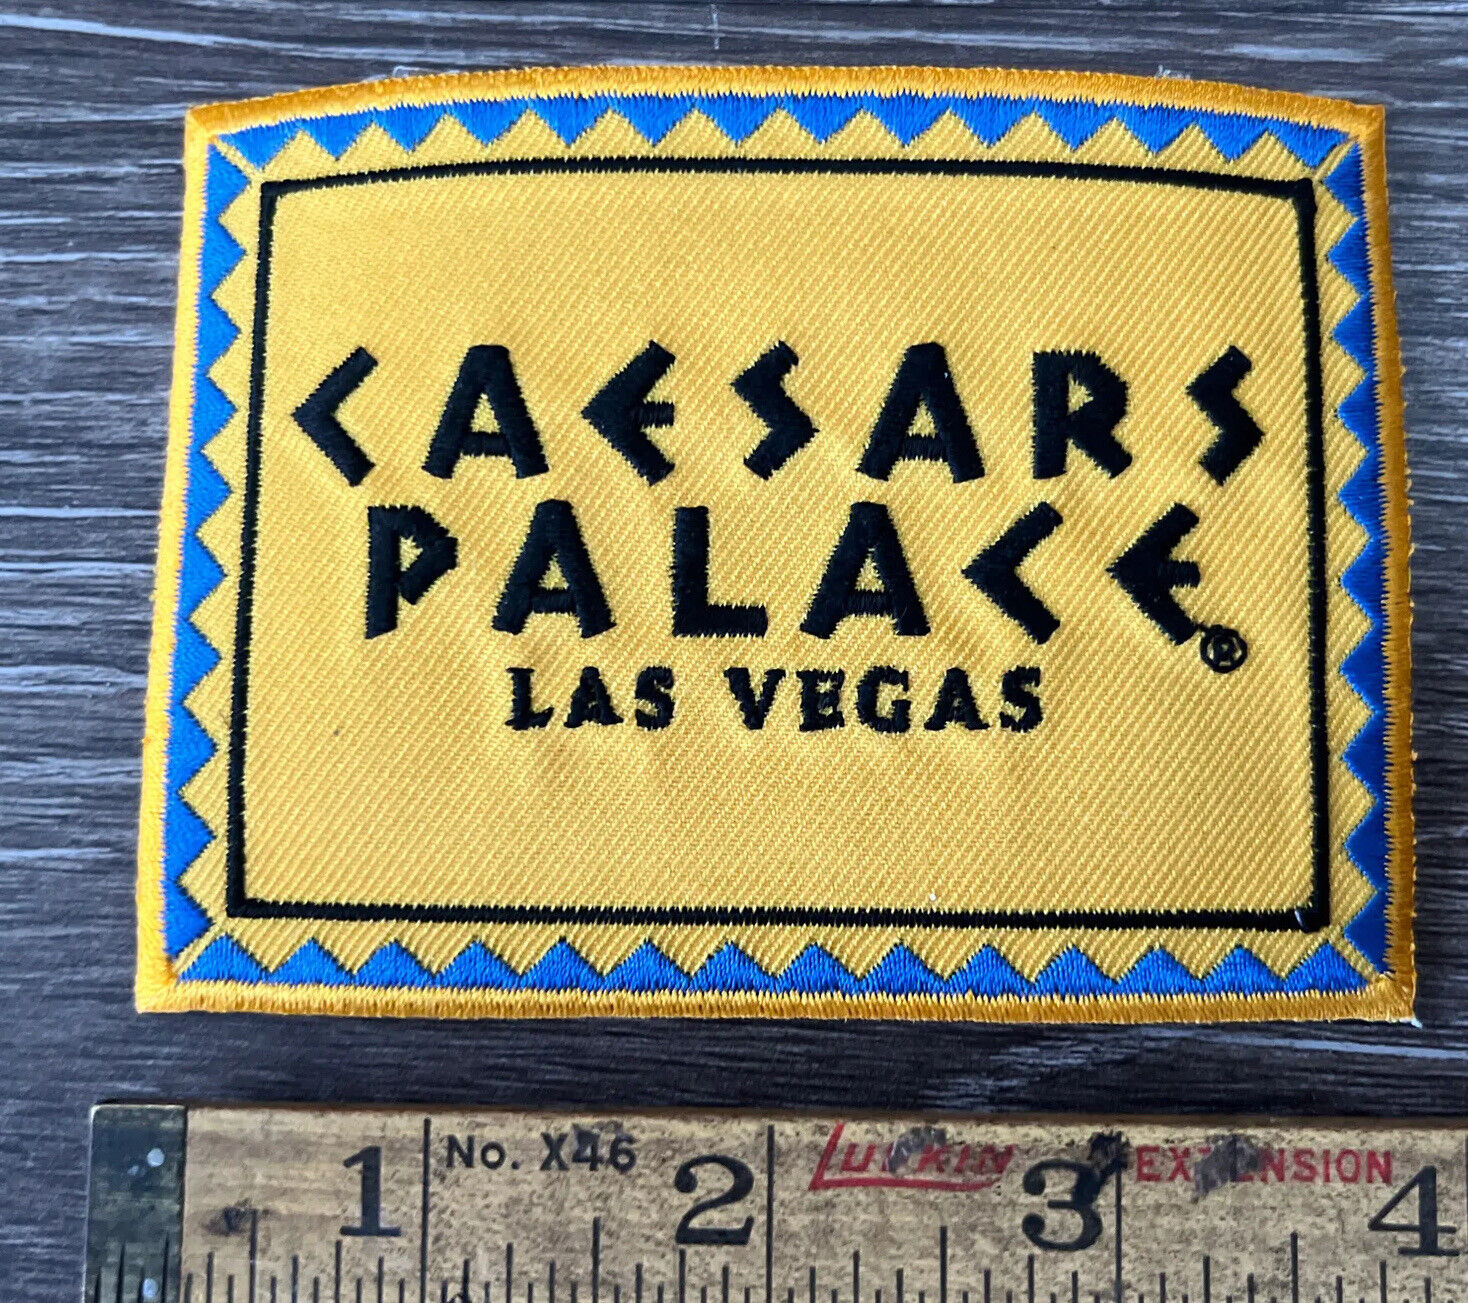 Vintage Las Vegas Caesars Palace Hotel and Casino Patch New Ships FAST